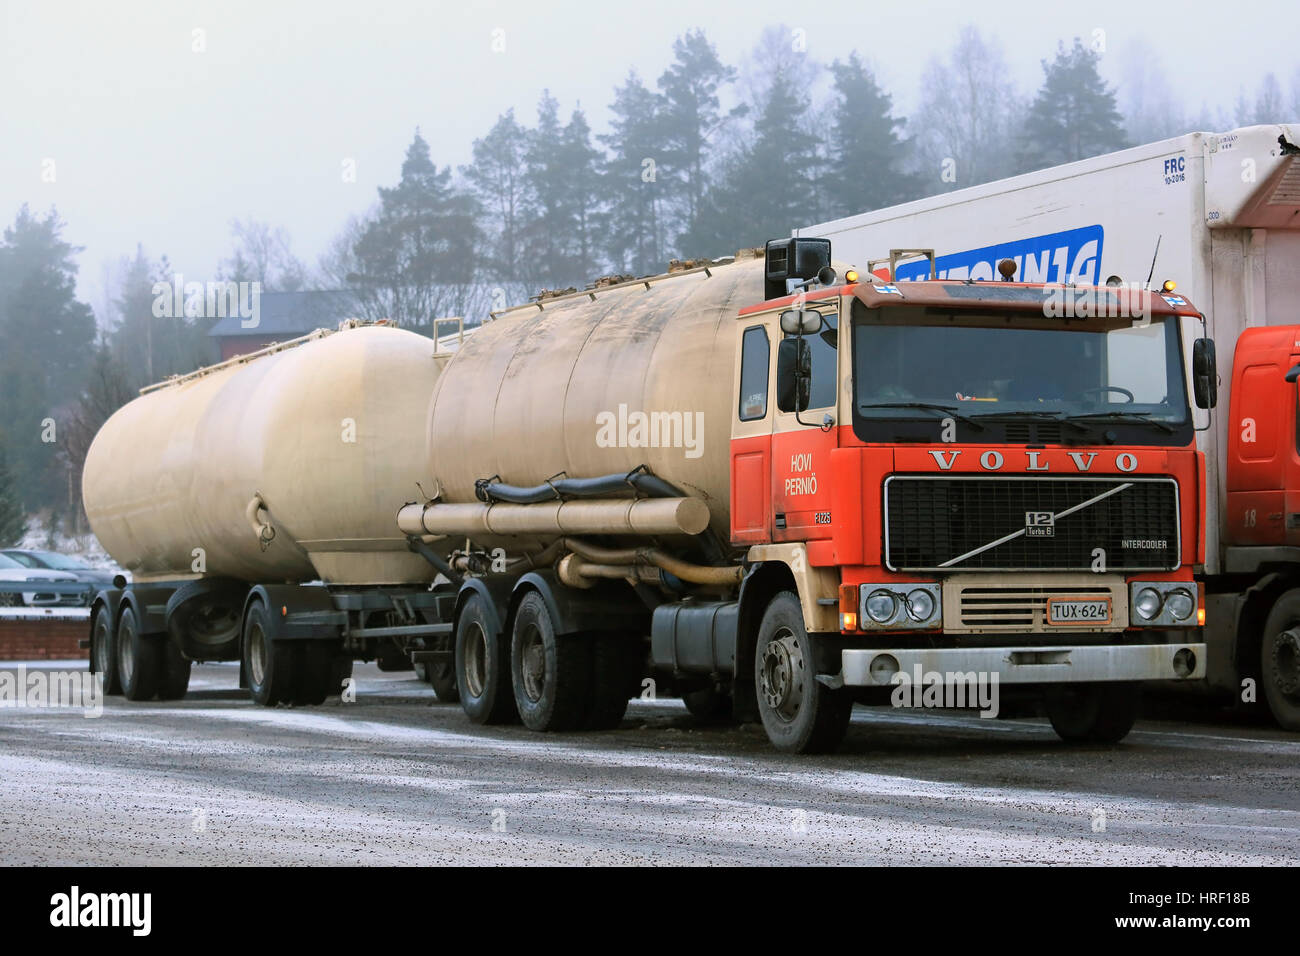 SALO, FINLAND - DECEMBER 16, 2016: Classic Volvo F1225 tank truck of Hovi parked on a truck stop in foggy winter weather. Stock Photo